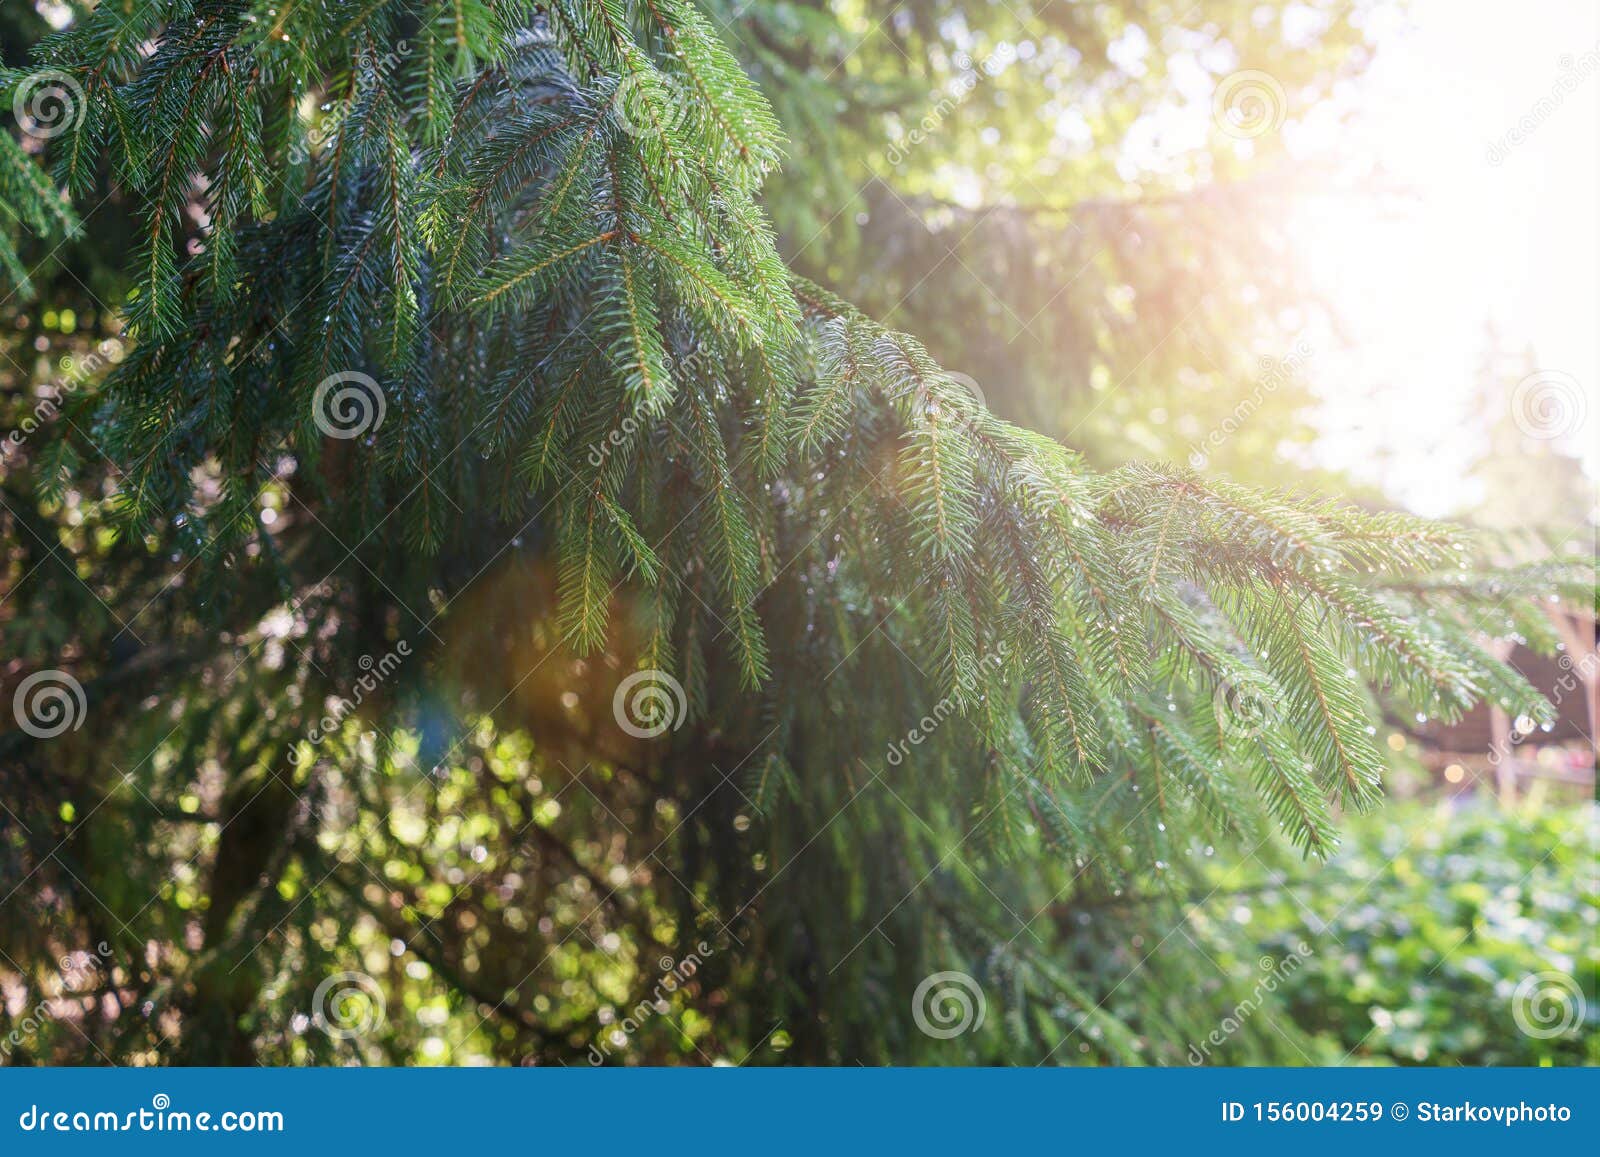 Coniferous Tree Branches Close Up Stock Image Image Of Countryside